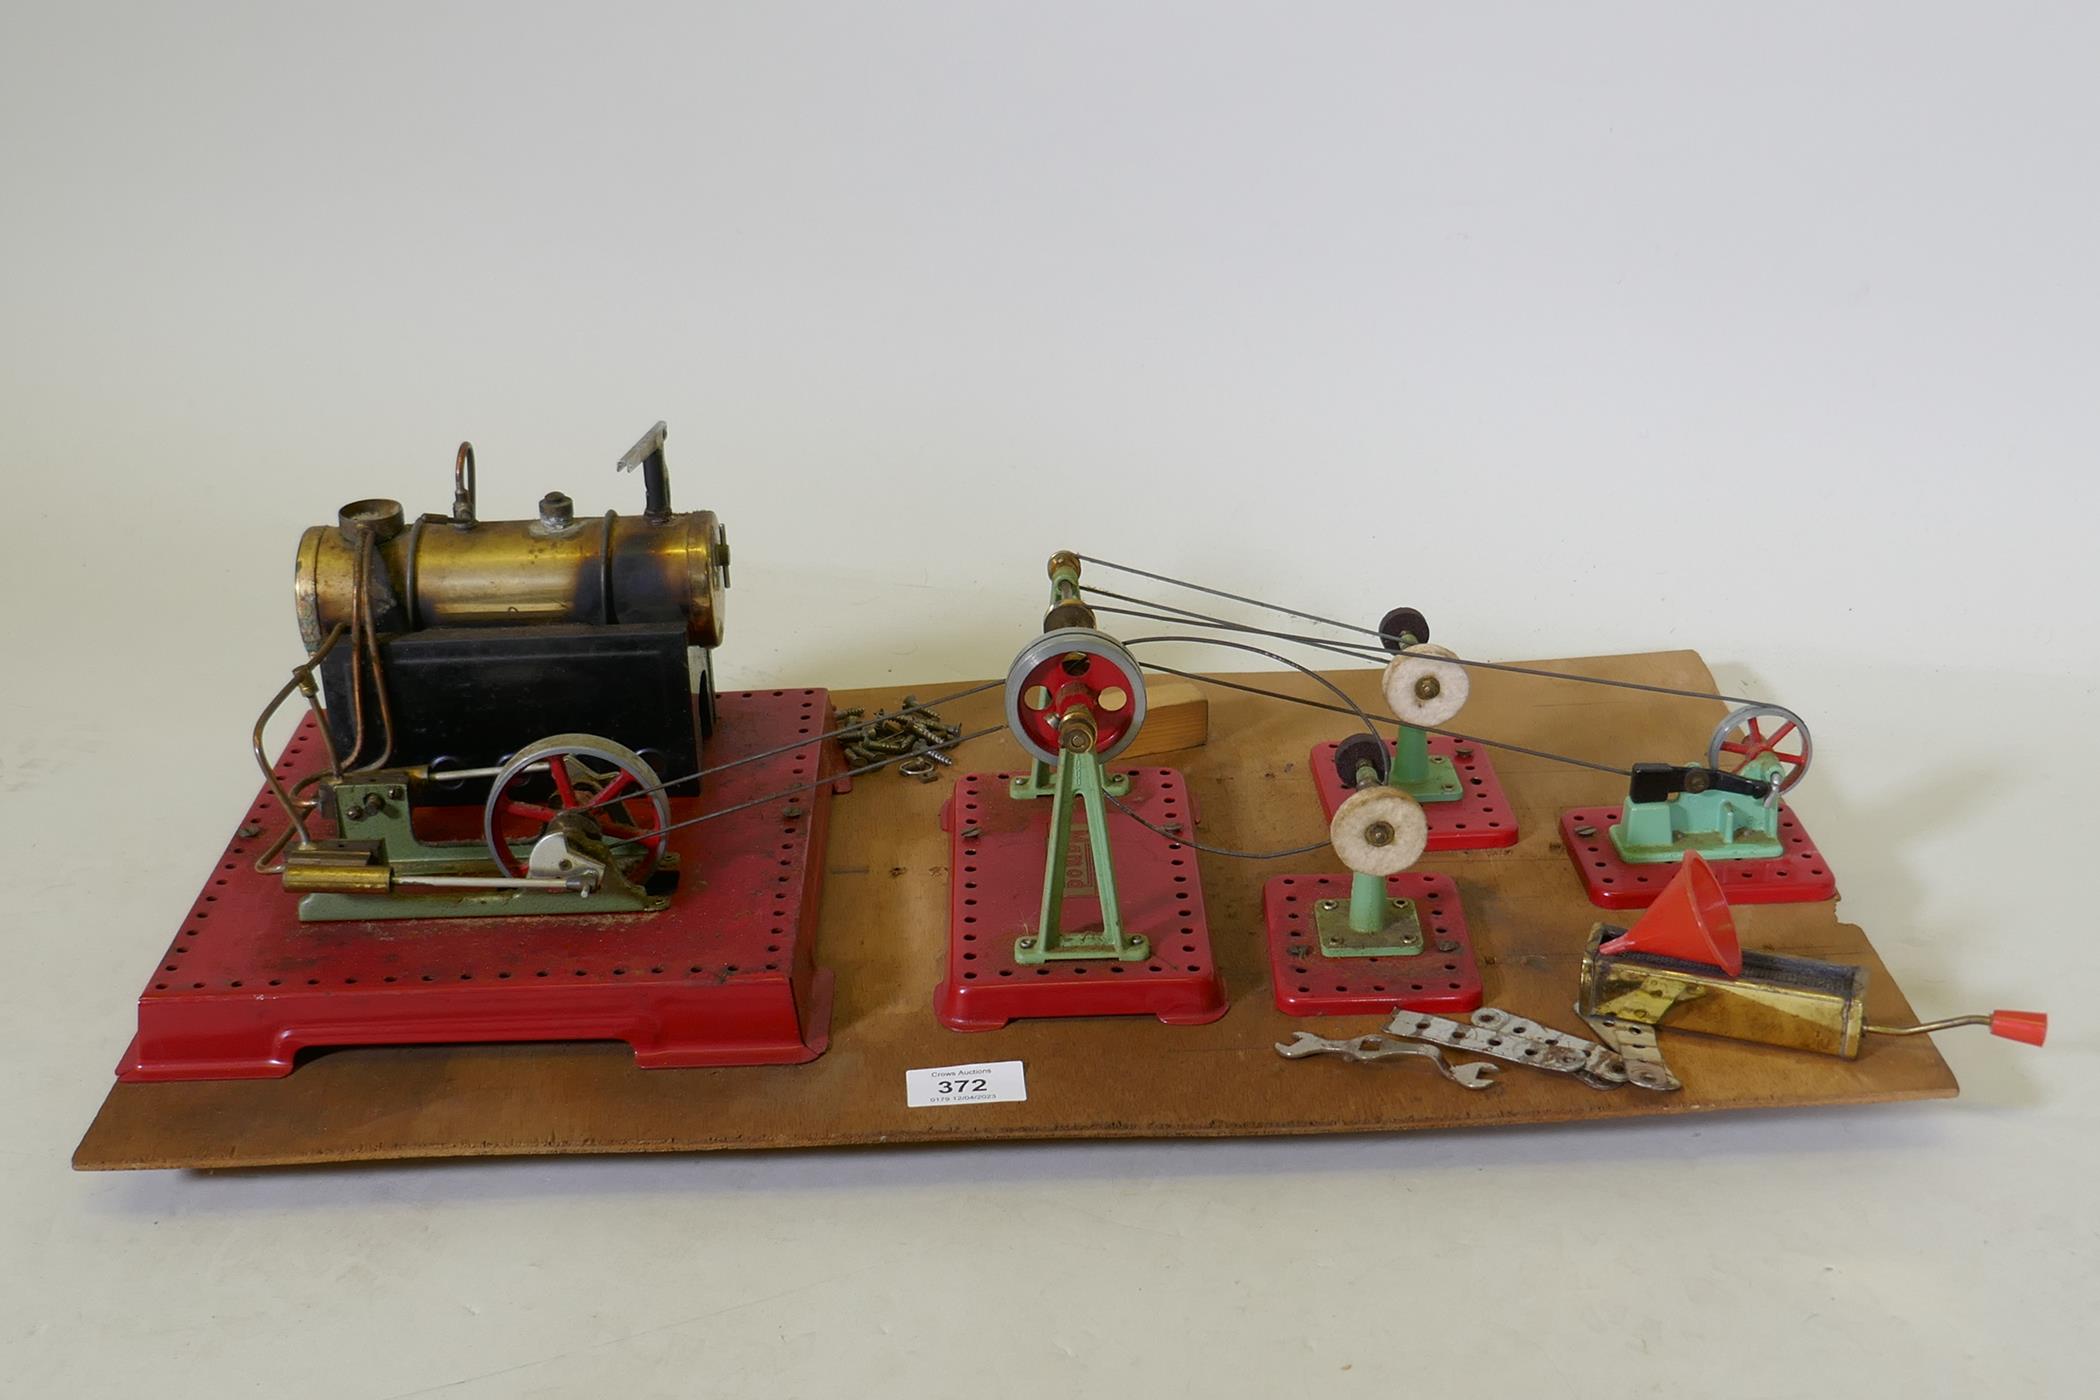 A Mamod steam driven workshop, mounted on a wood board, 60 x 35cm